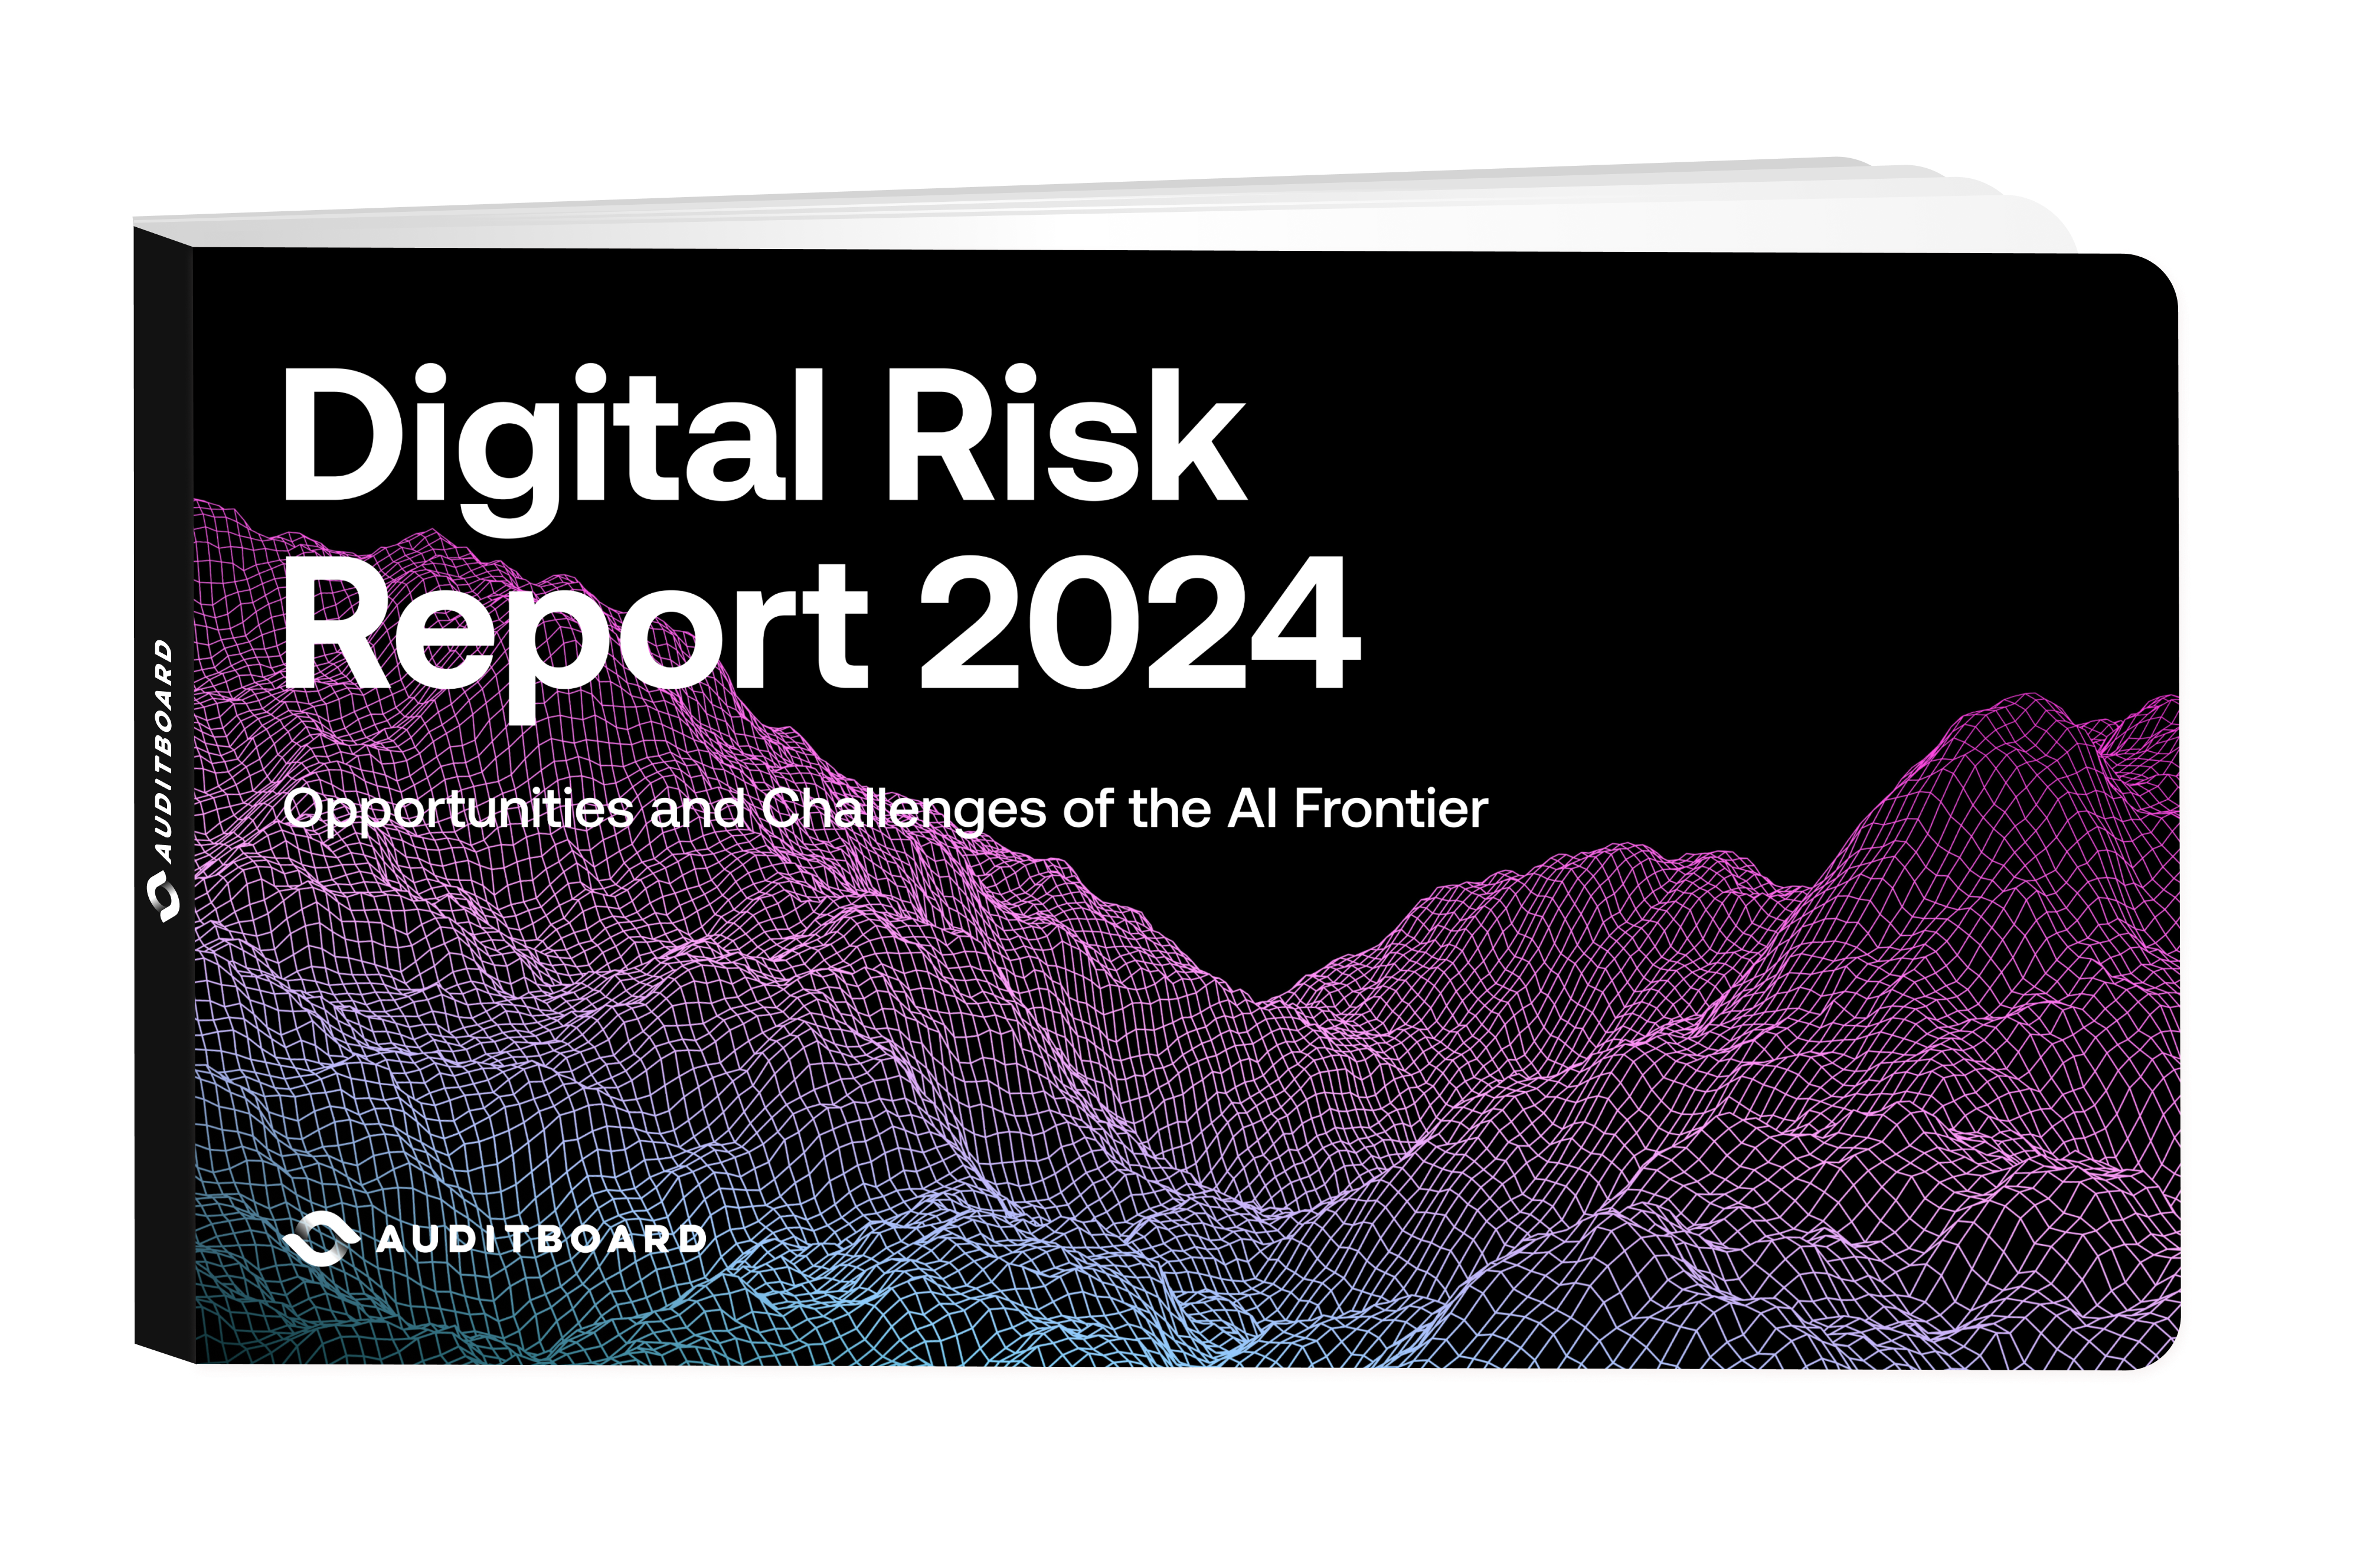 2024 Digital Risk Report: Opportunities and Challenges of the AI Frontier